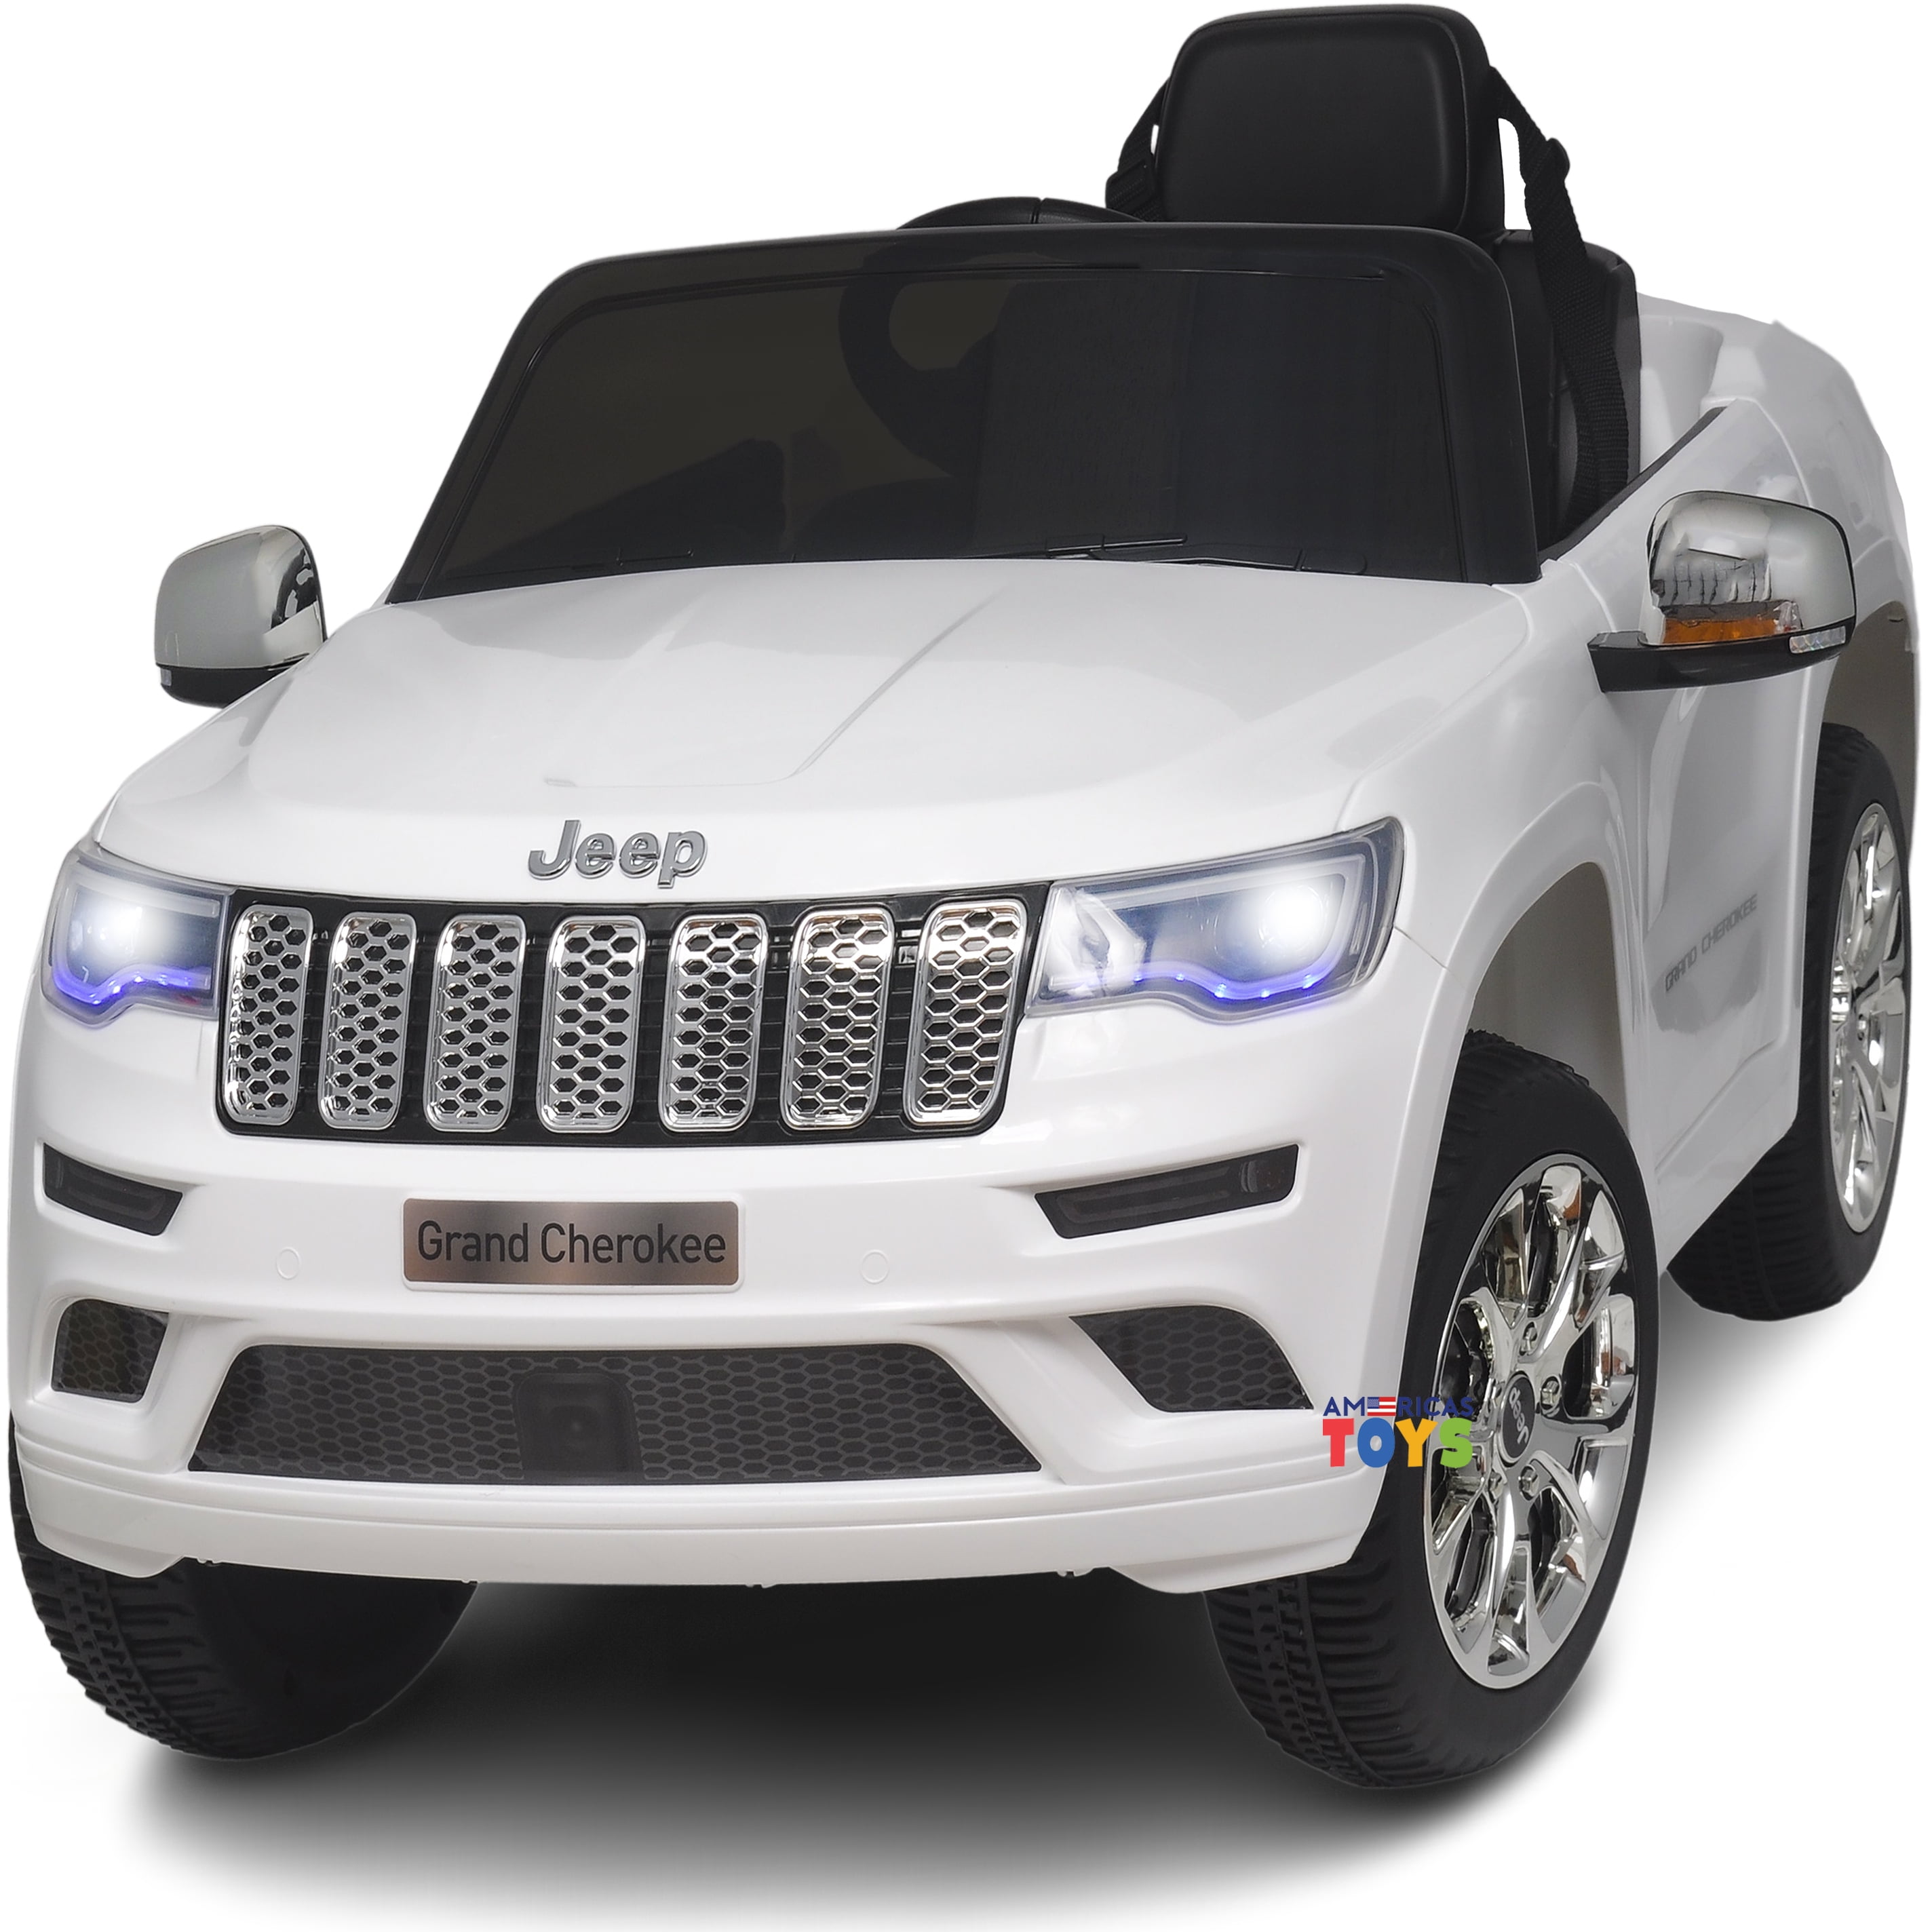 Jeep Grand Cherokee 12V Powered Ride on Car for Kids with Remote ...